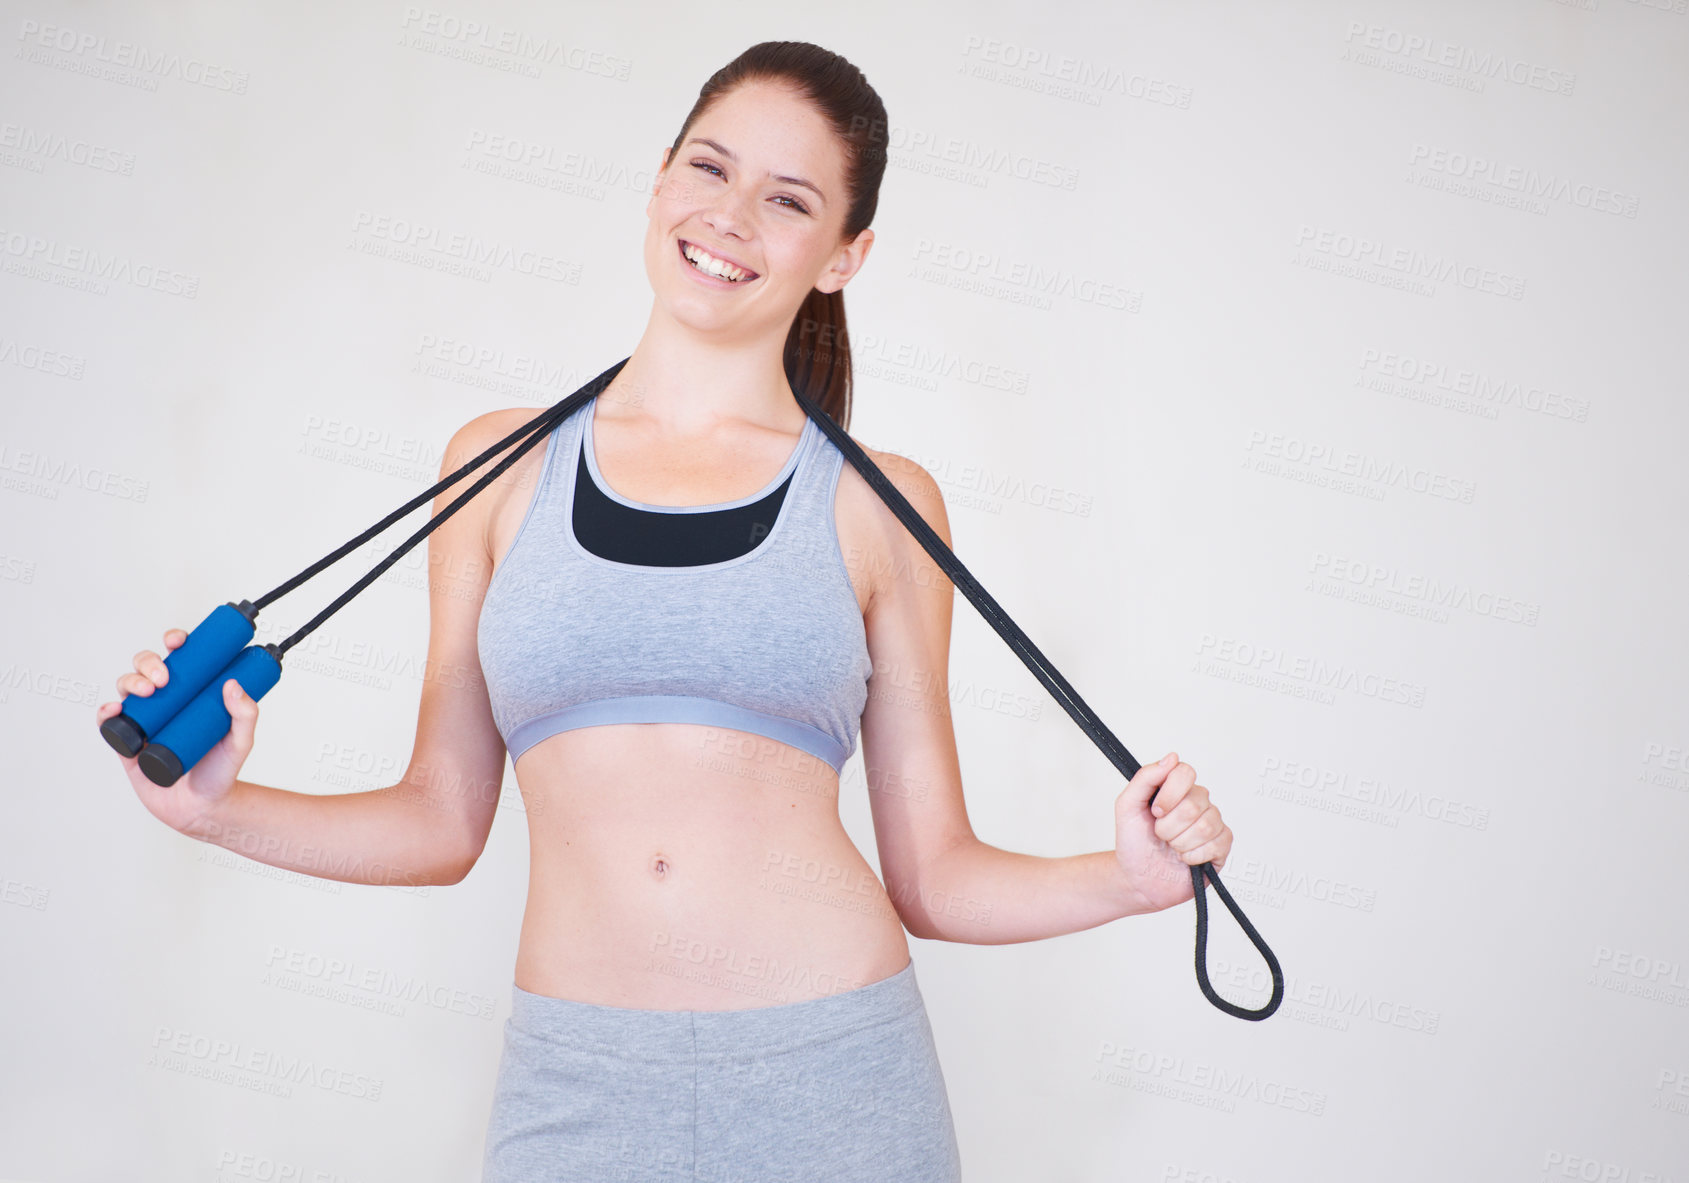 Buy stock photo Portrait of an attractive young woman holding a skipping rope over her shoulders